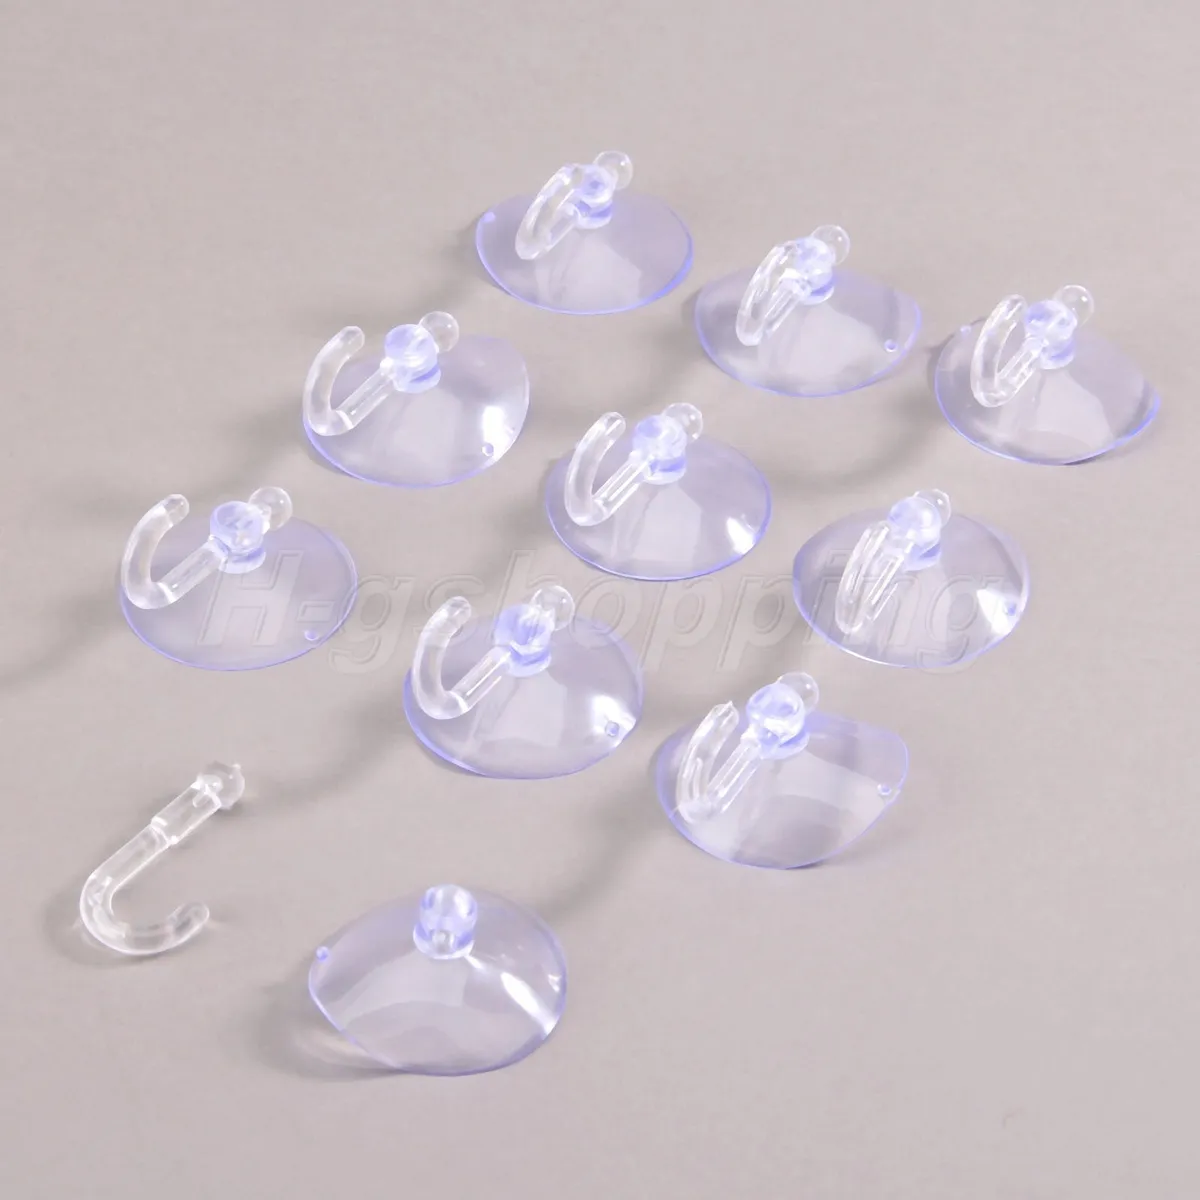 Powerful Vacuum Suction Cup Hooks Bathroom Suction Cup Corner